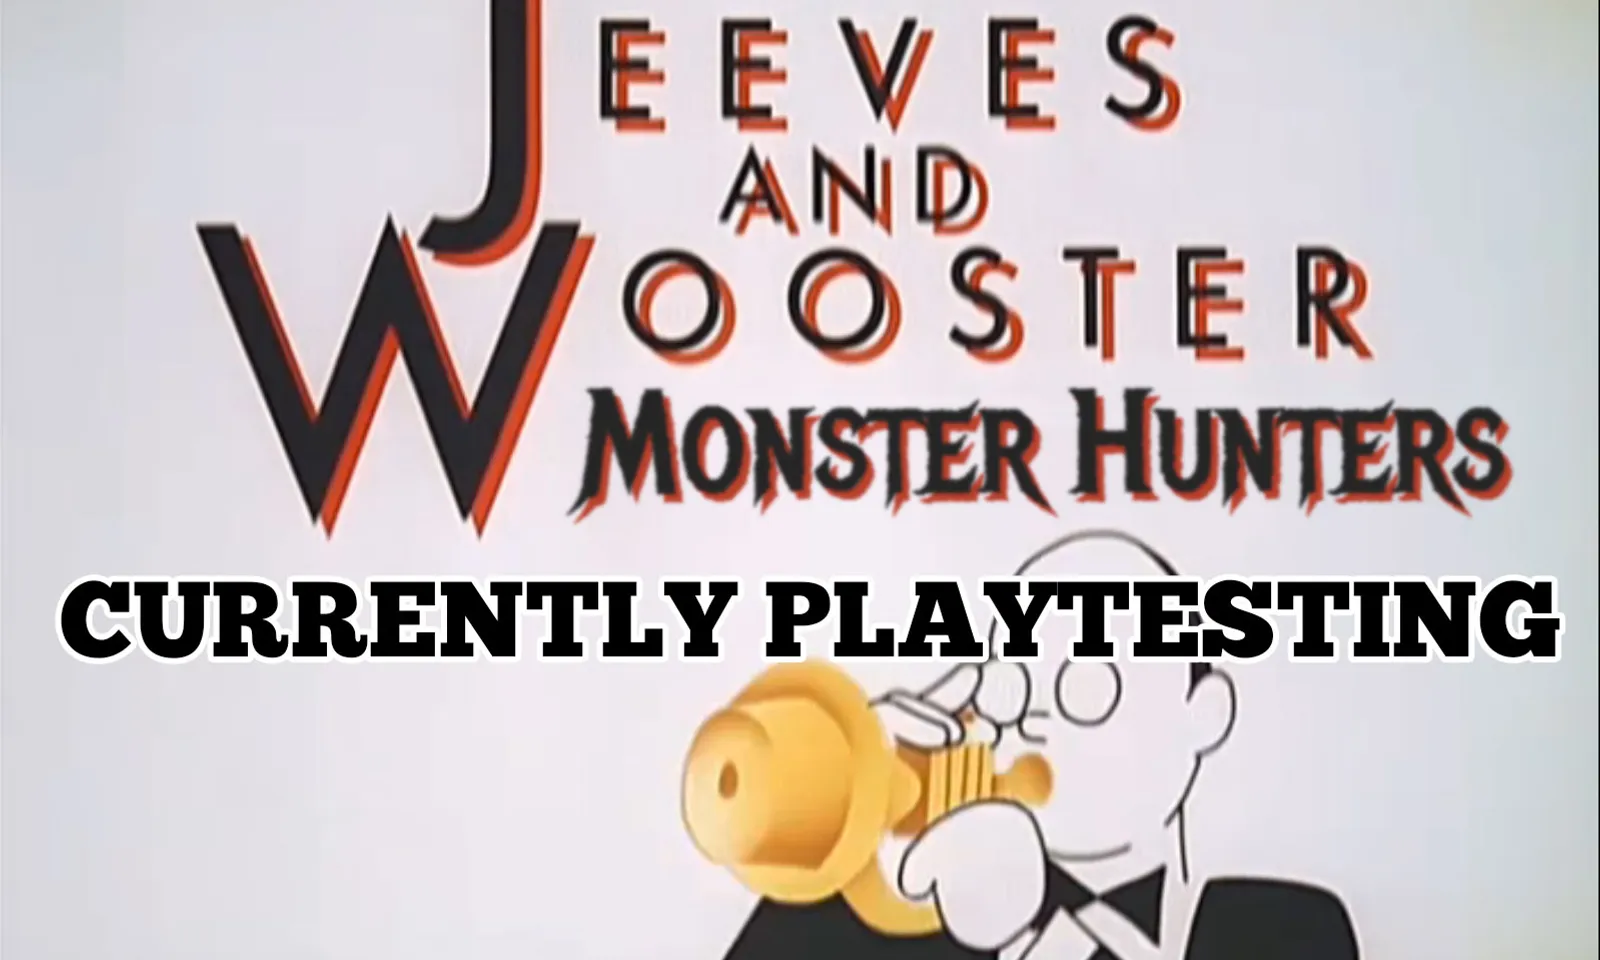 The Jeeves and Wooster title clip from the show with 'Monster Hunters' added